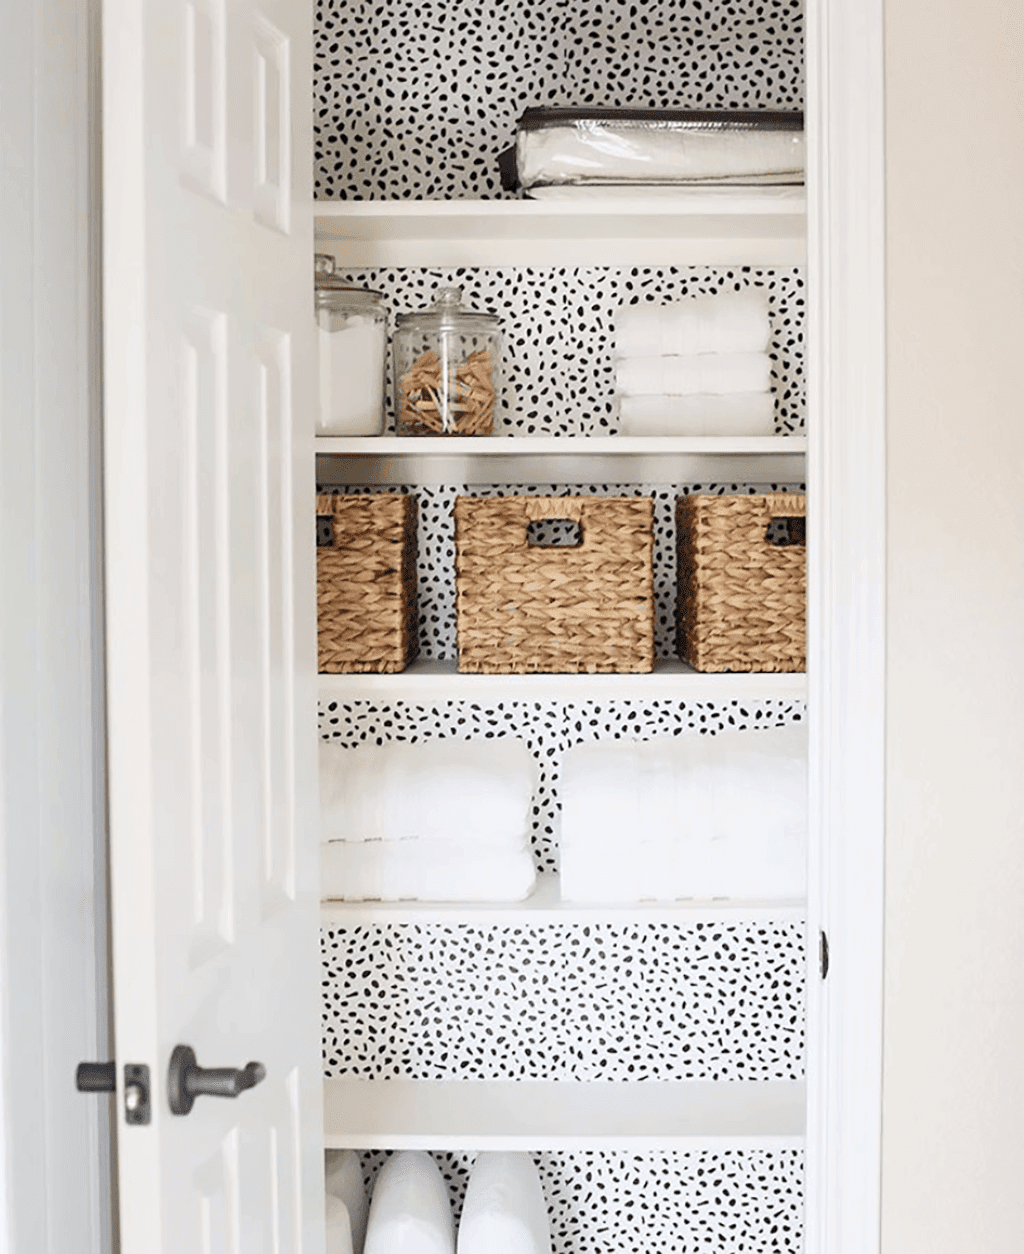 How to Transform a Linen Closet to Open Shelving - House On